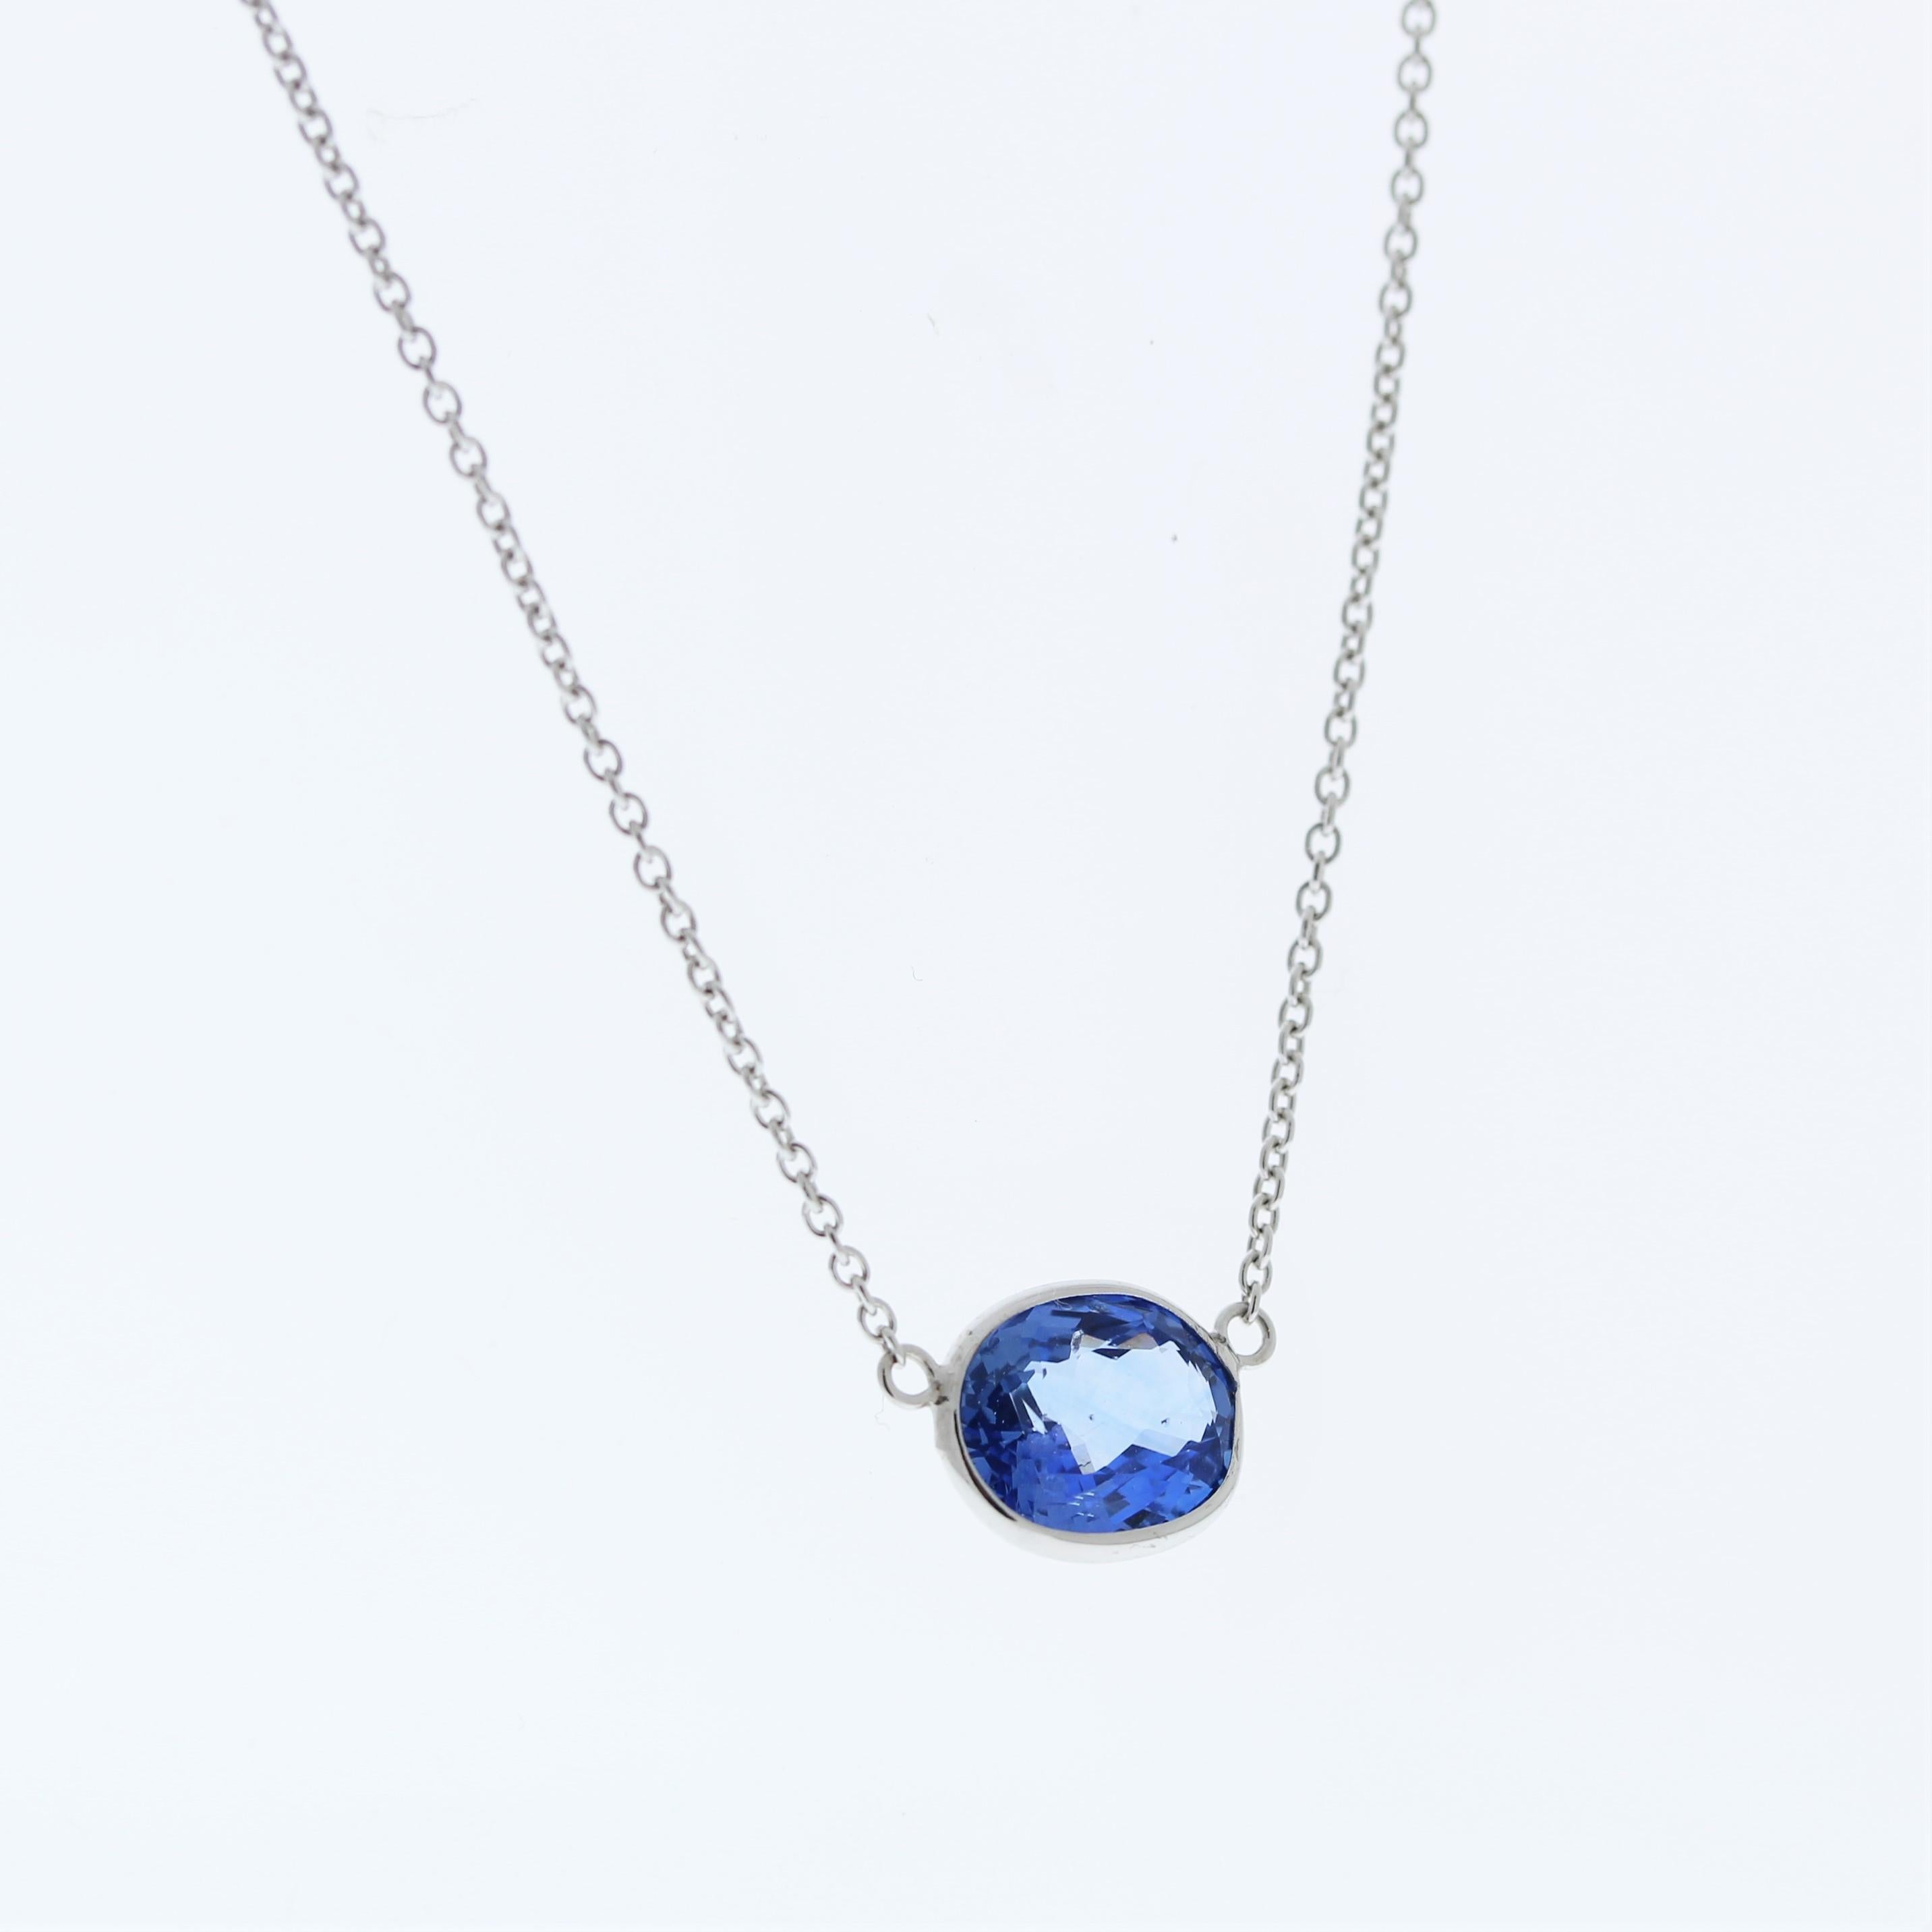 The necklace features a 3.27-carat oval-cut blue sapphire set in a 14 karat white gold pendant or setting. The use of white gold enhances the overall aesthetic, and the blue sapphire adds a touch of timeless elegance to the piece. This necklace